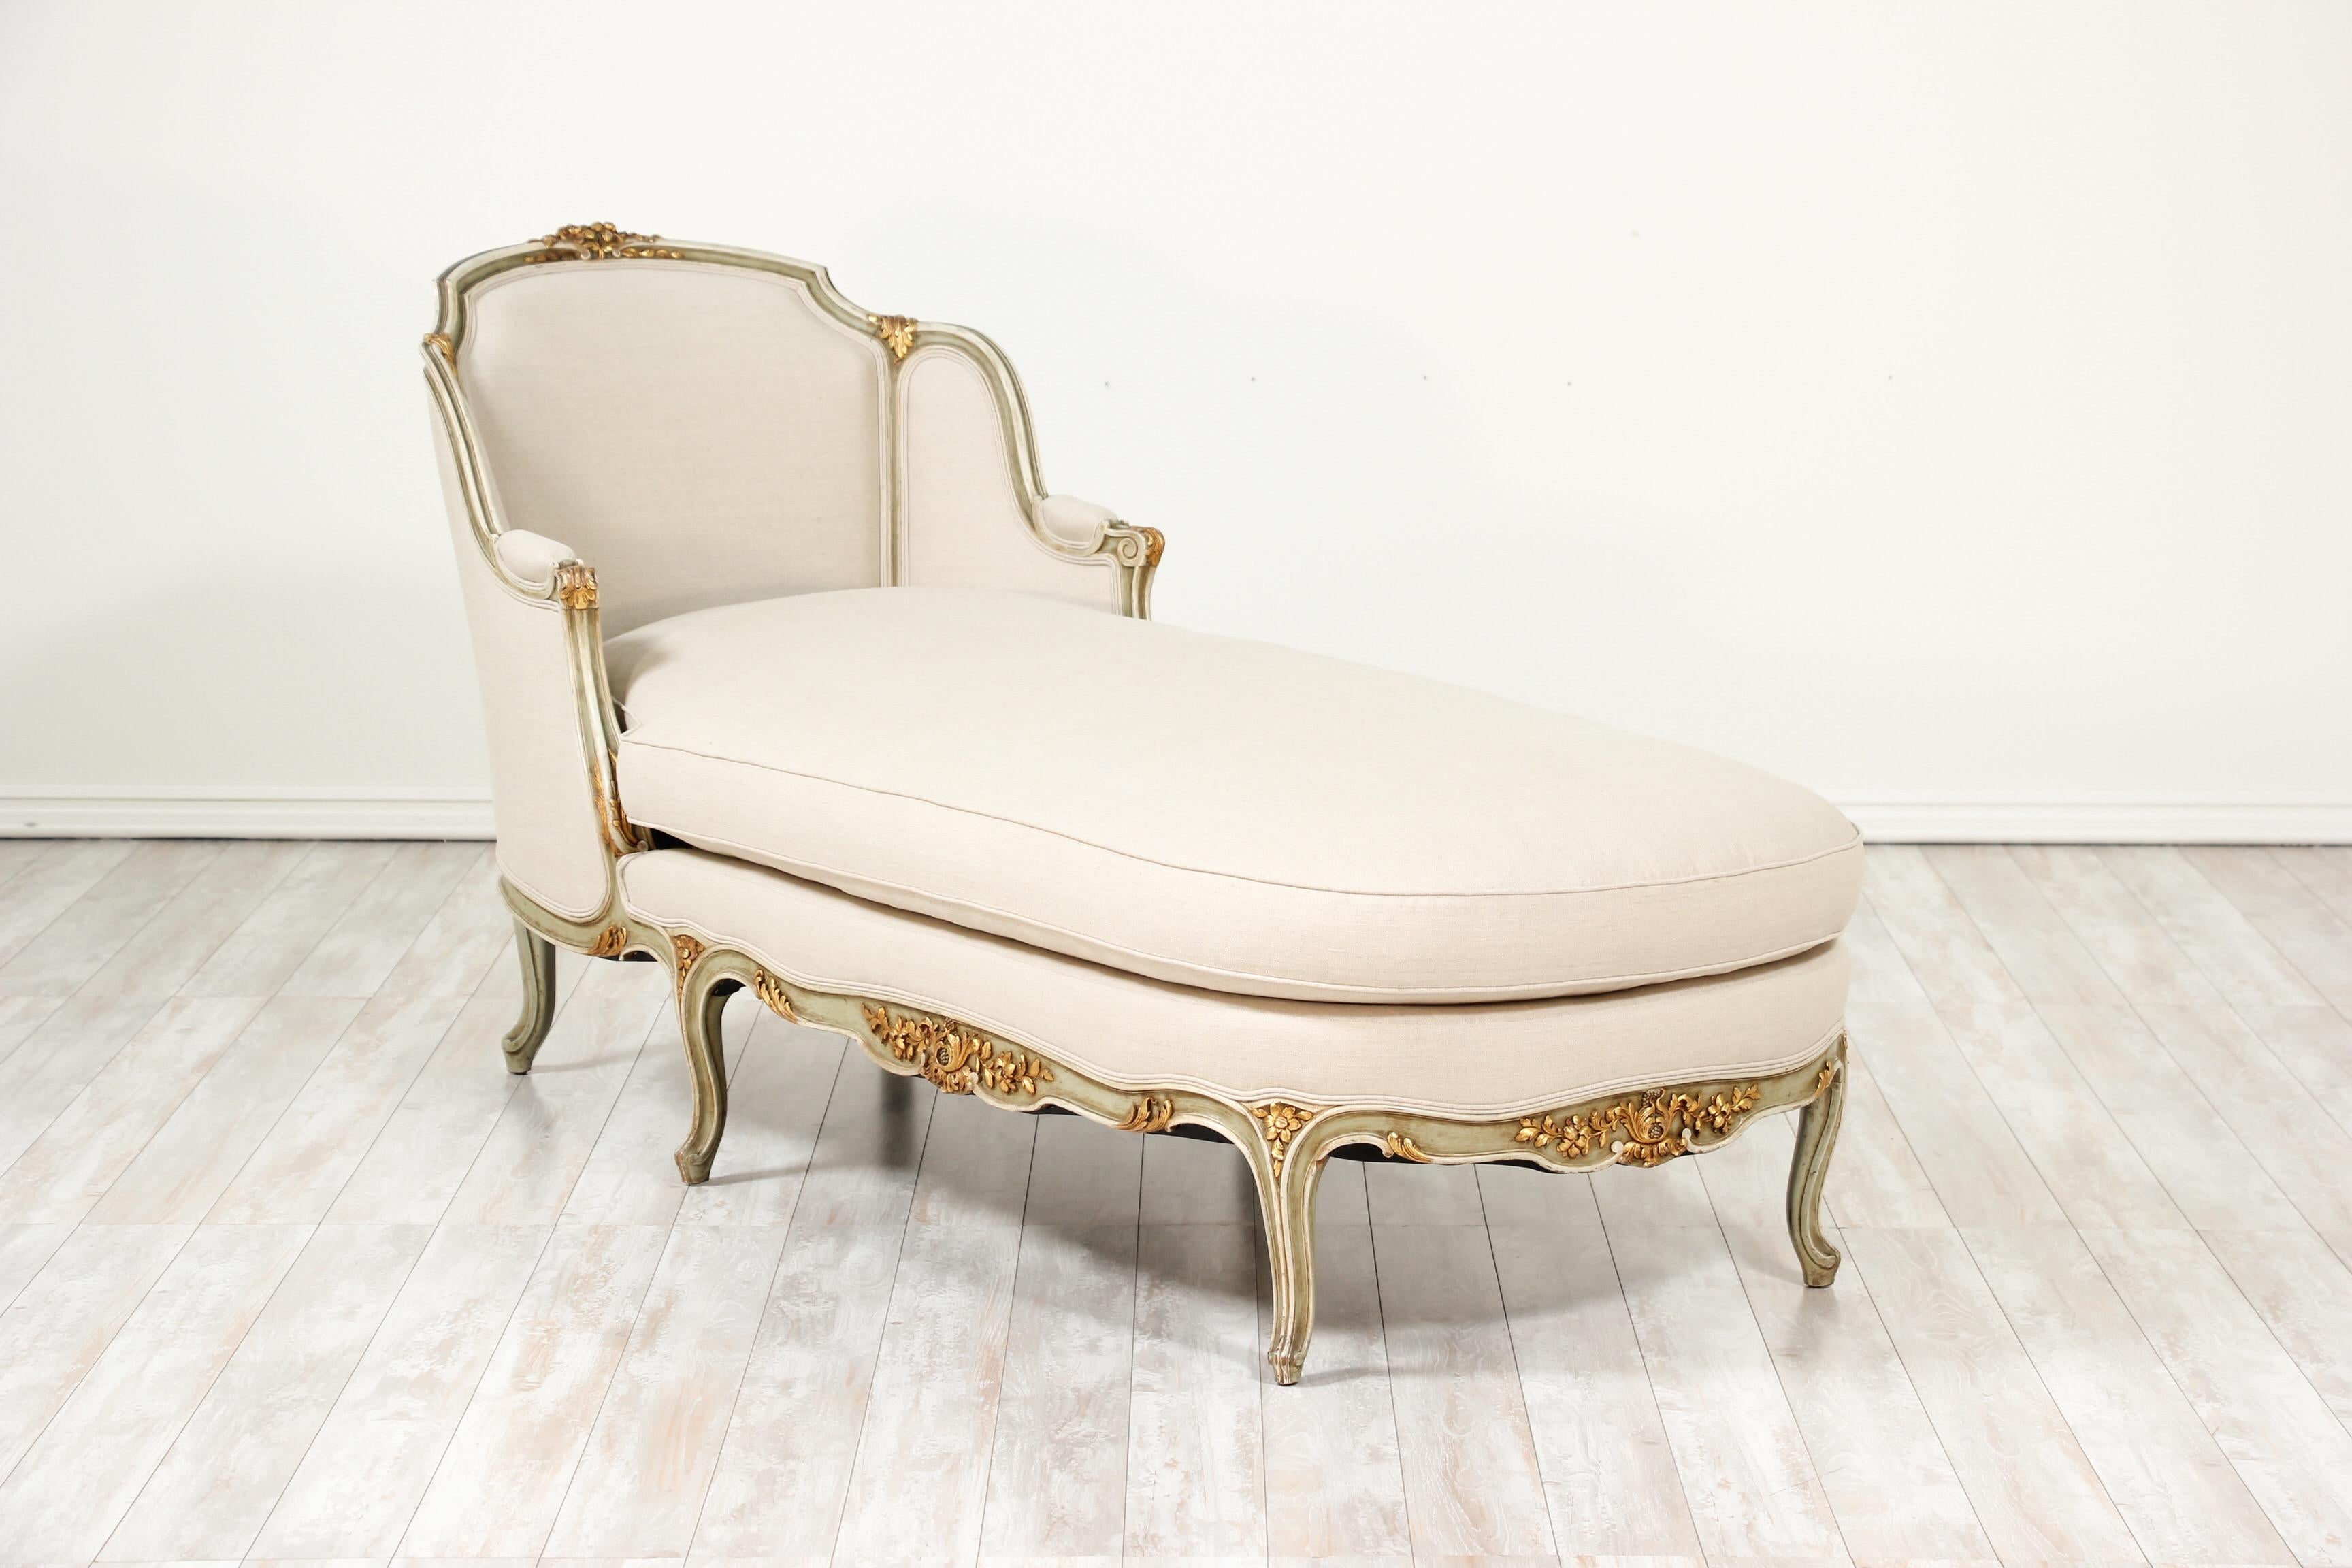 Luxurious, 1940s French Louis XV-style painted and parcel-gilt carved chaise lounge with new Belgian linen upholstery. 

This exquisite chaise features finely carved gilded floral decorations which accent it’s soft light olive-green and cream